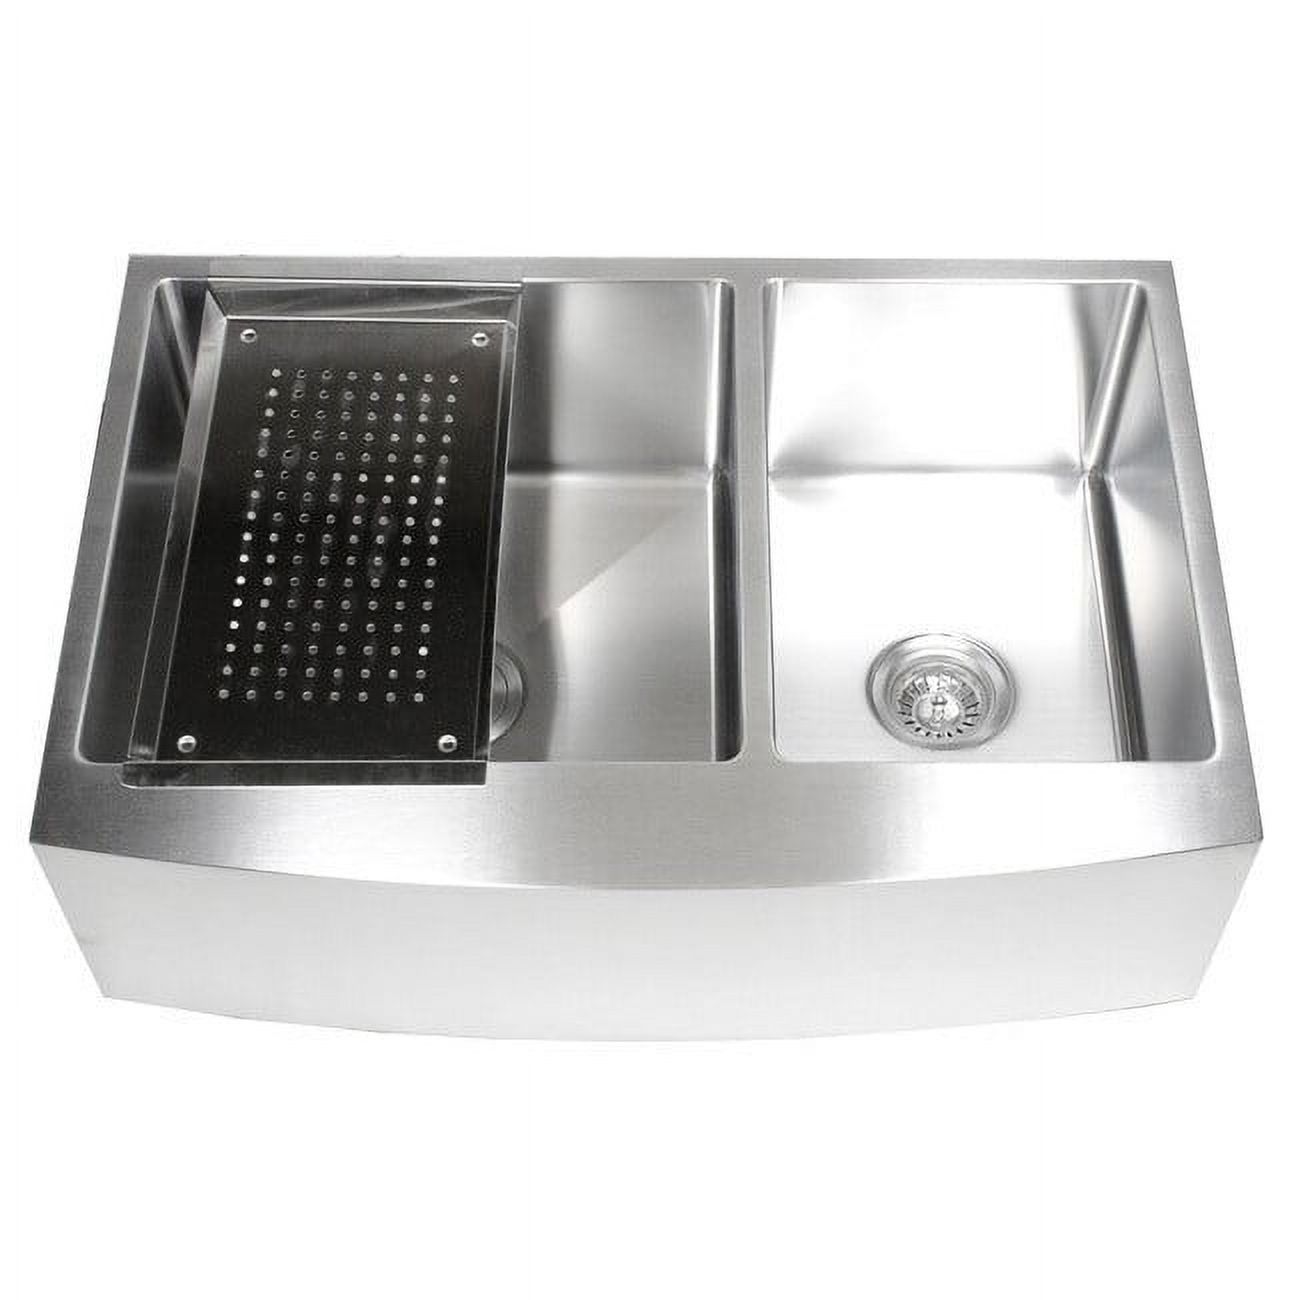 Contempo Living Inc 36-inch 15mm Curved Front Farm Apron 60/40 Double Bowl Kitchen Sink - image 4 of 5